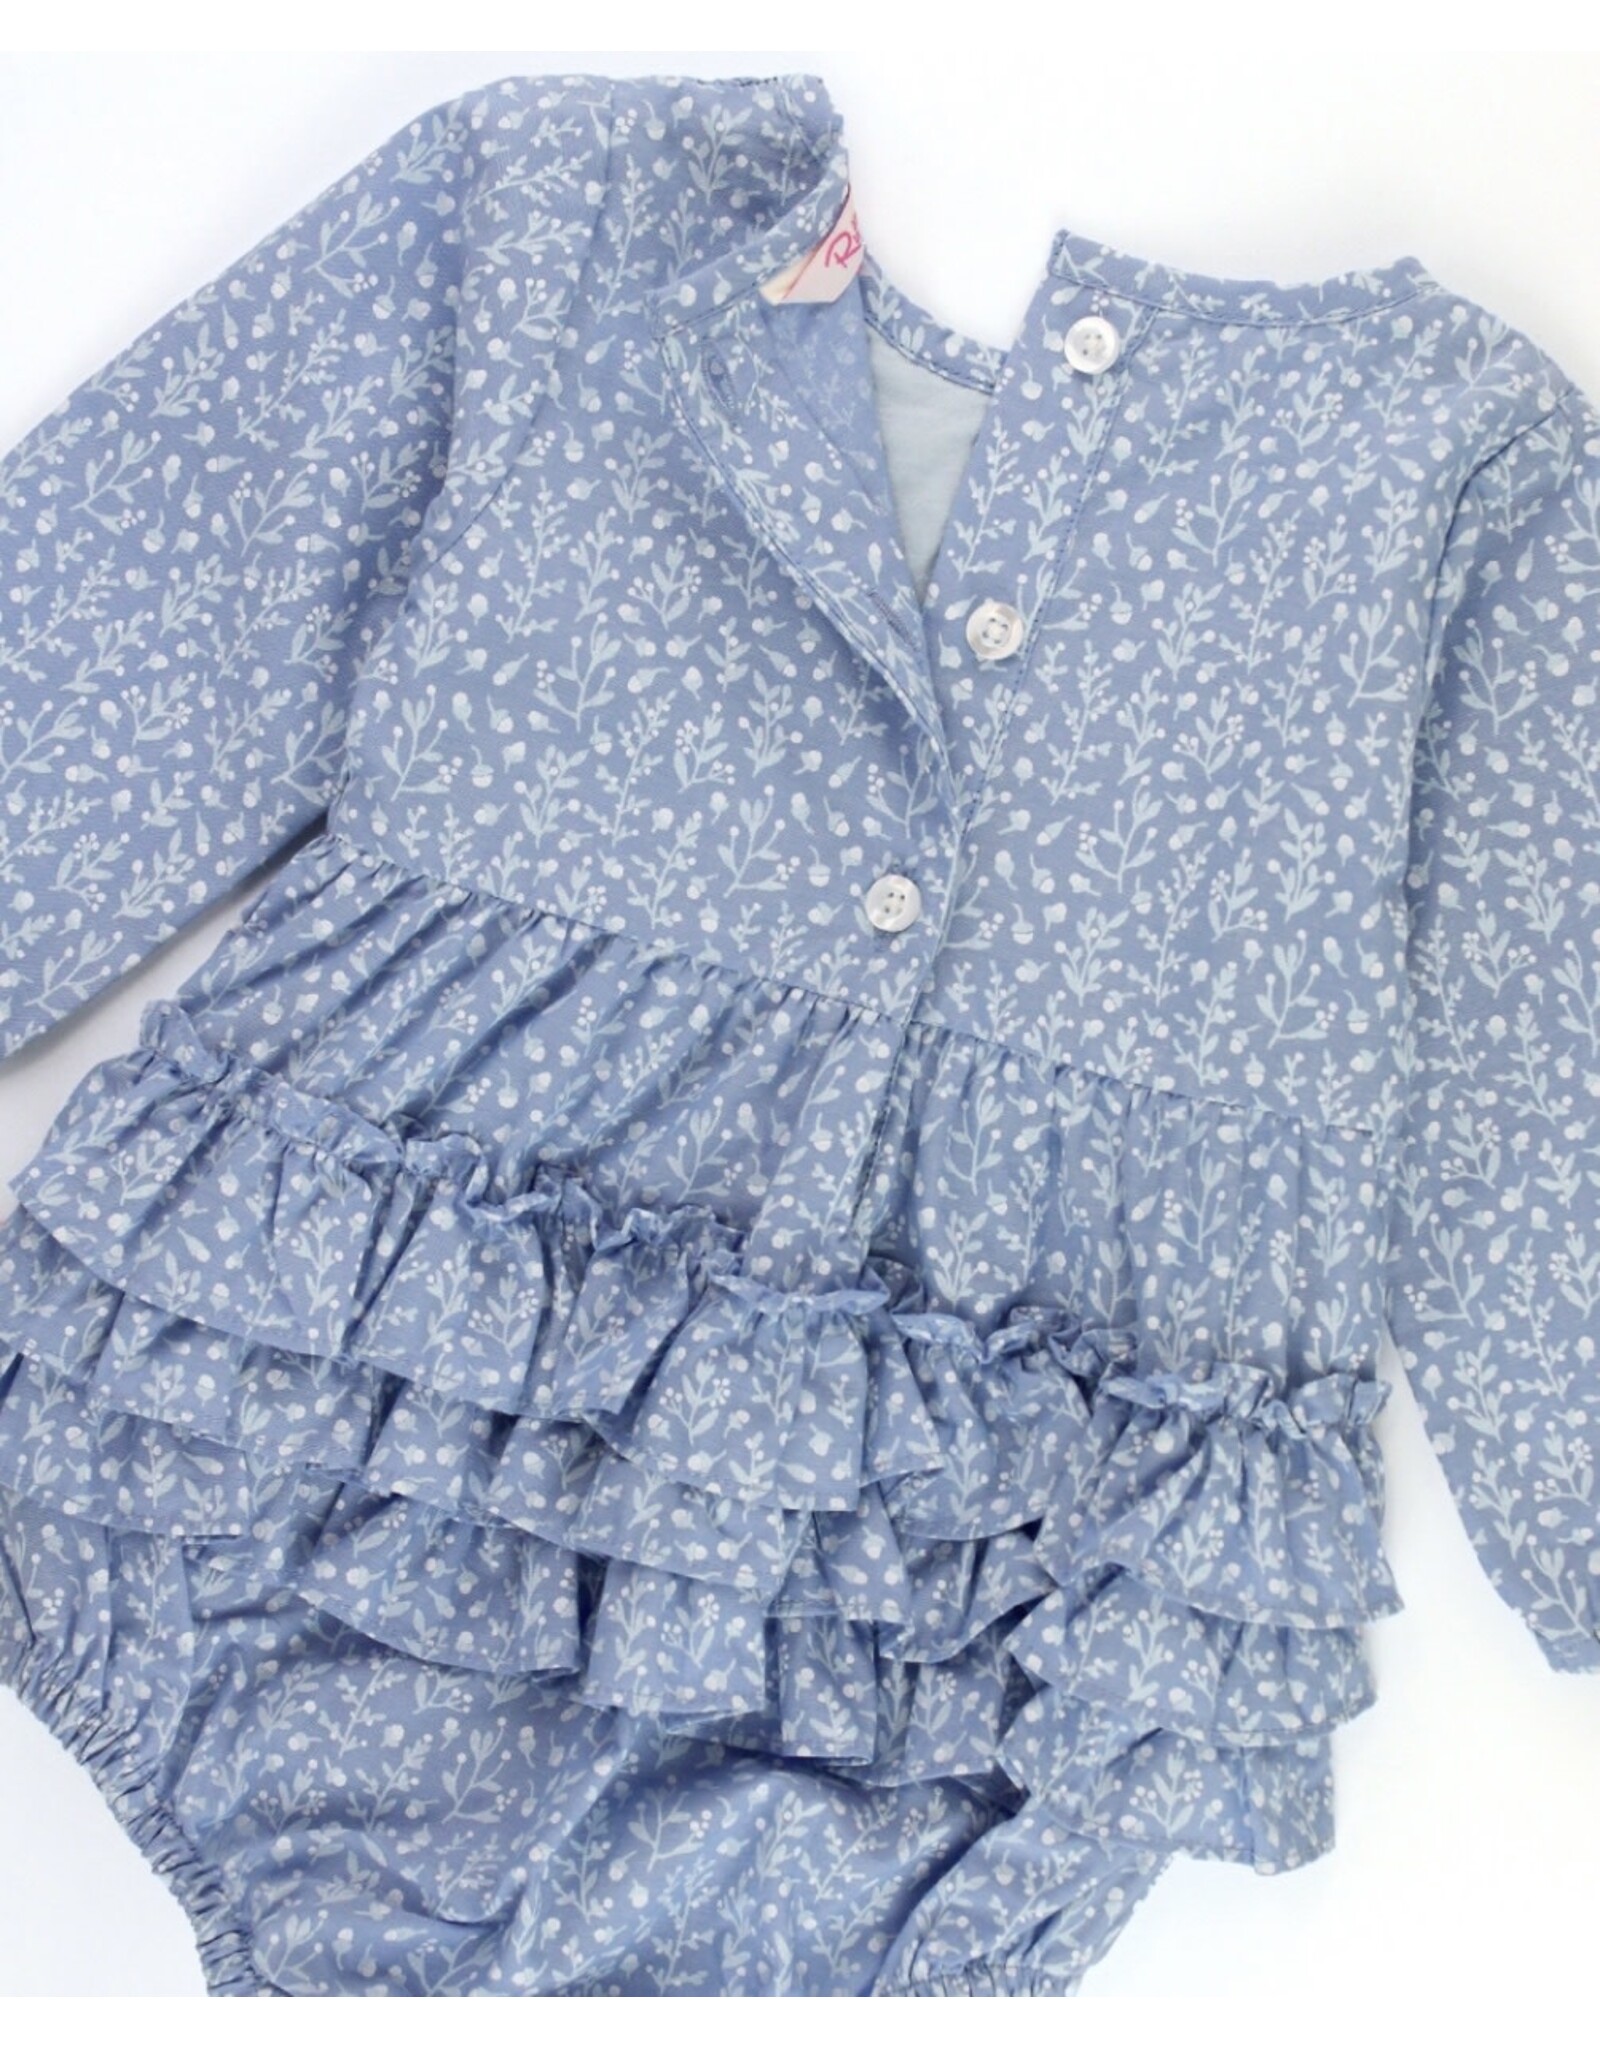 Ruffle Butts Ruffle Butts- Woodland Berry Frost Smocked Bubble Romper